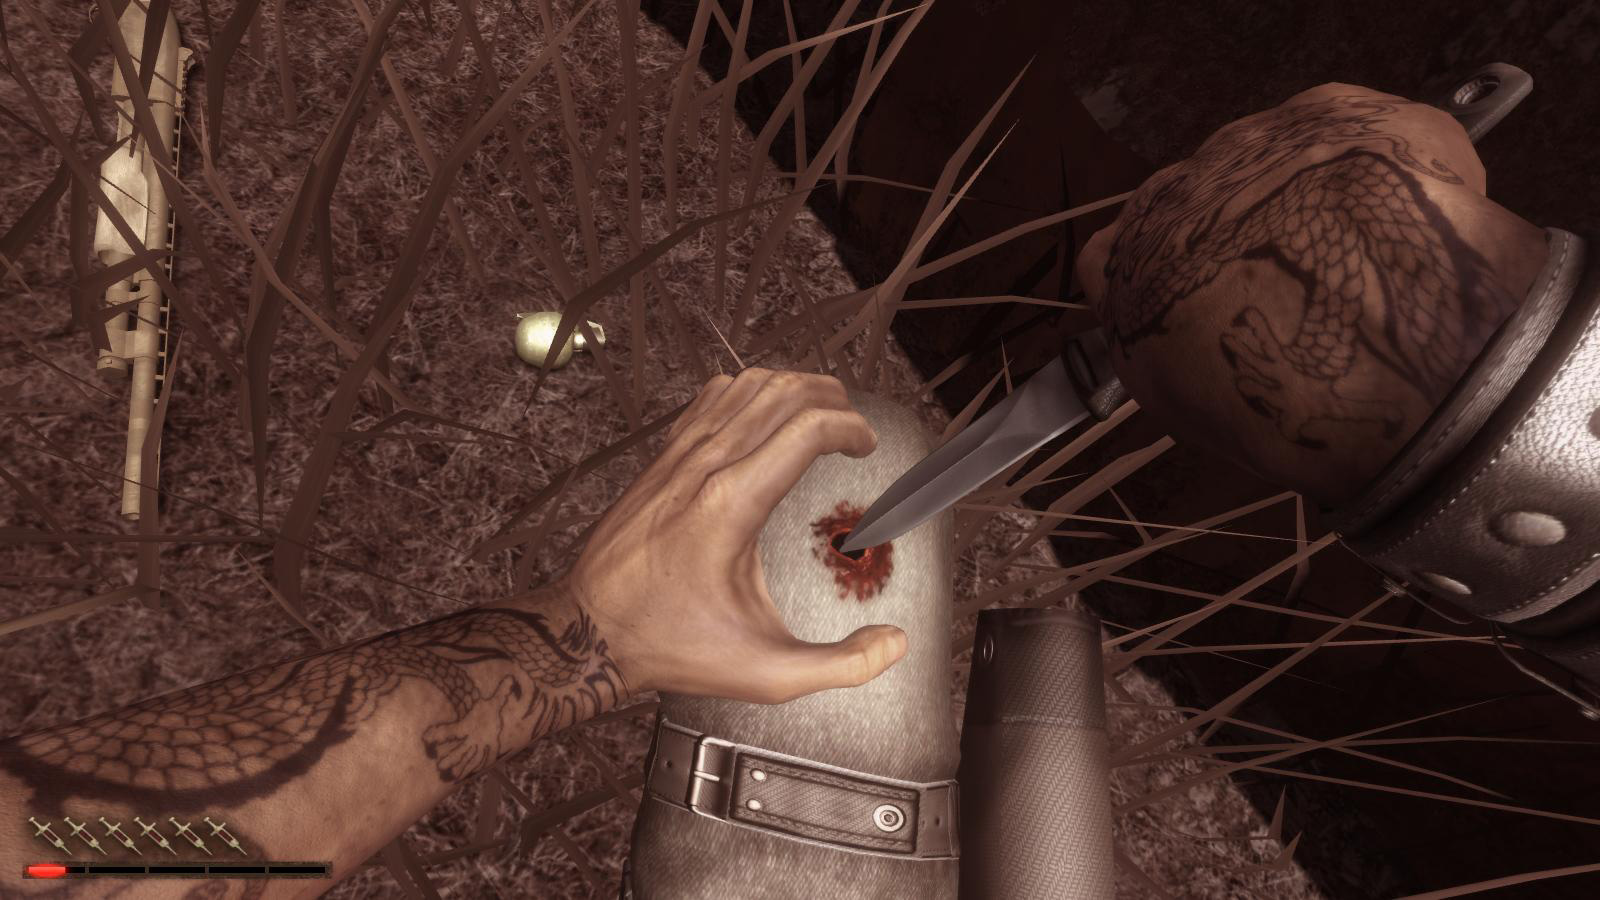 10 years in far cry 2 is still the most exciting of series farcry screen wound